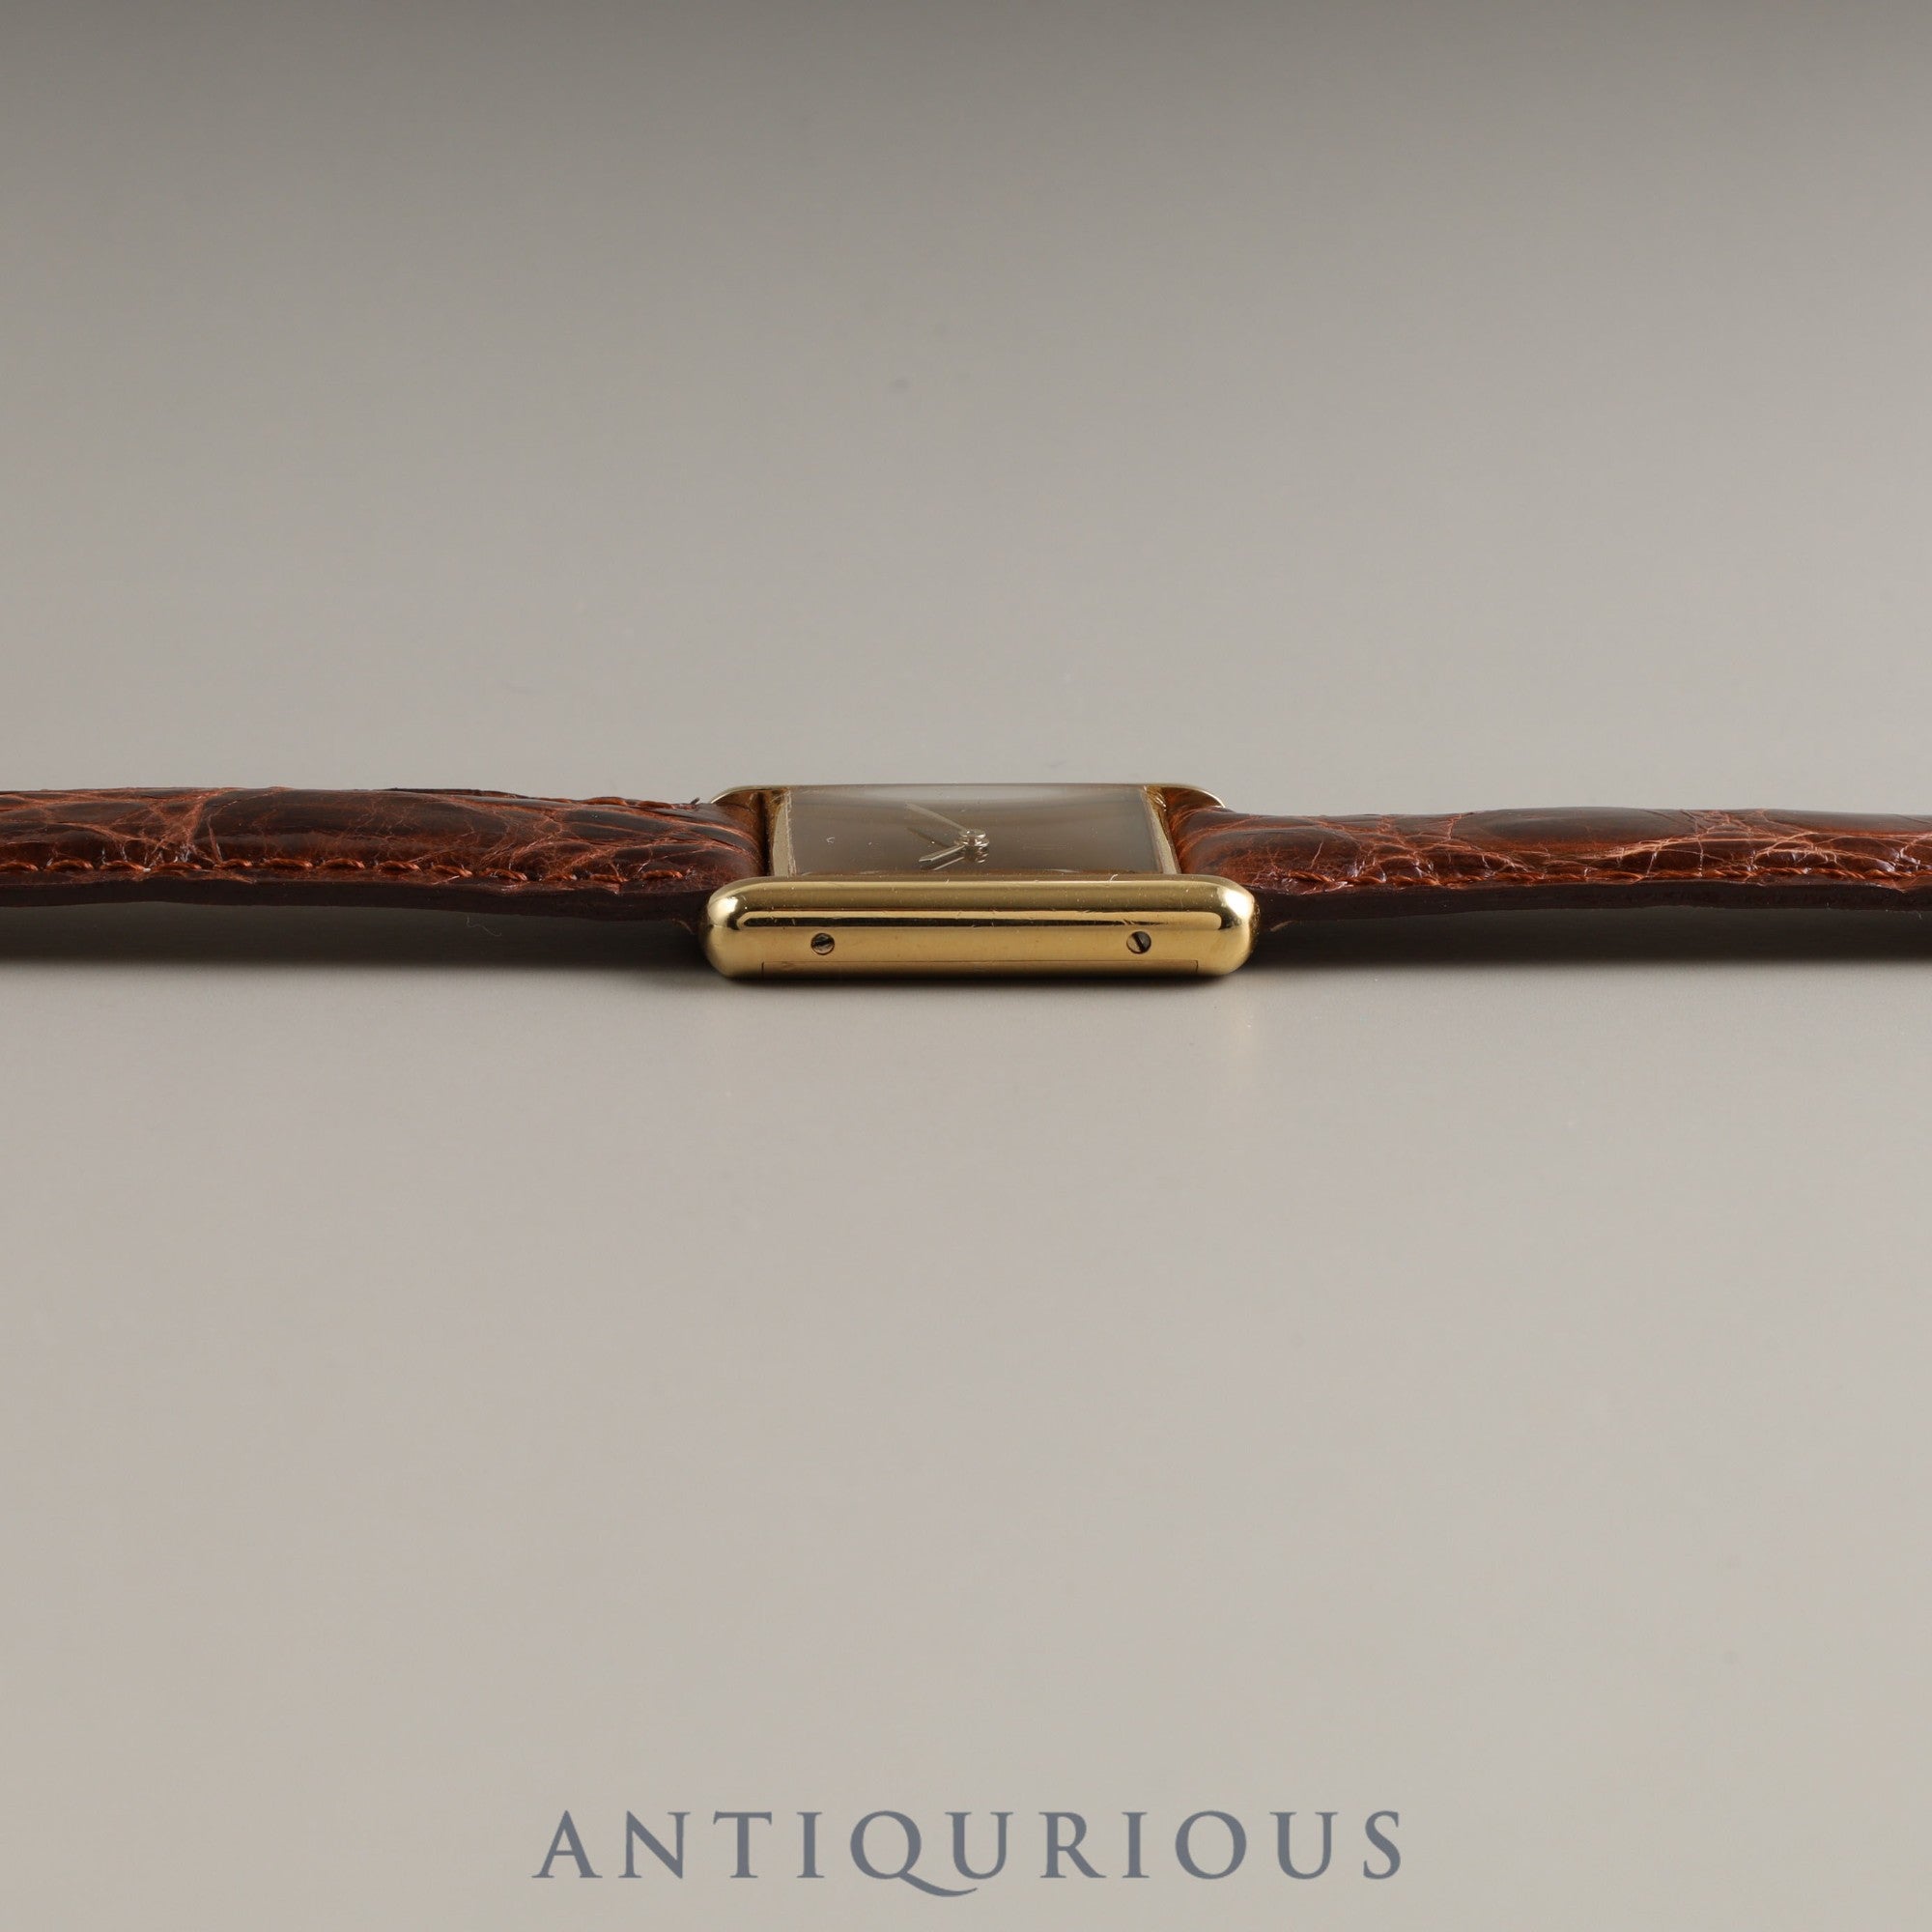 CARTIER Must Tank LM Manual winding 925 Leather Genuine buckle (GP) Brown mahogany dial 1983 International lifetime warranty Cartier boutique complete service